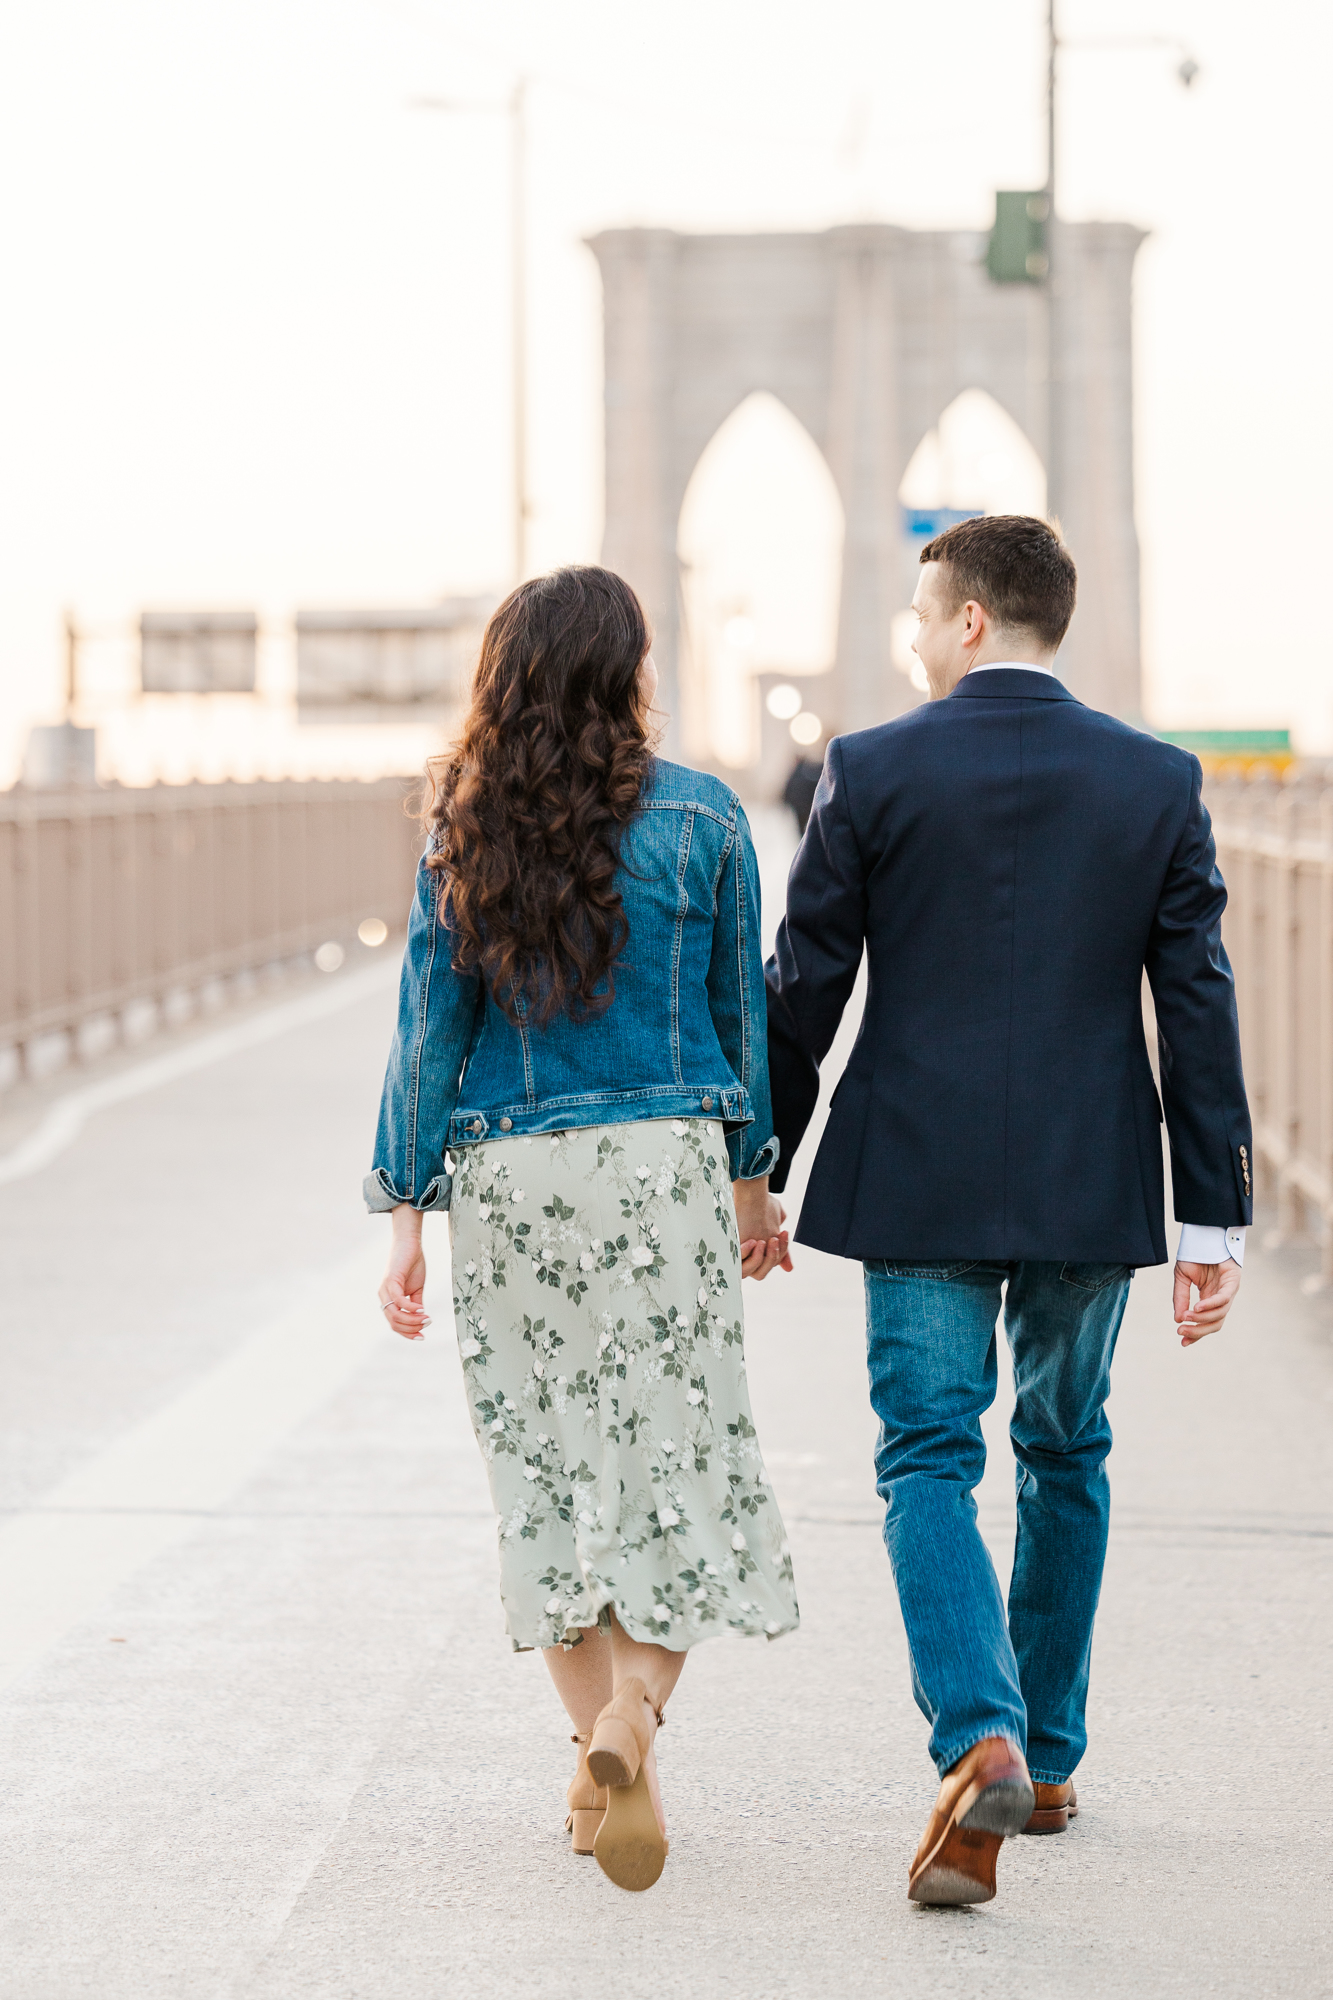 Timeless Brooklyn Bridge and South Street Seaport Engagement Photography